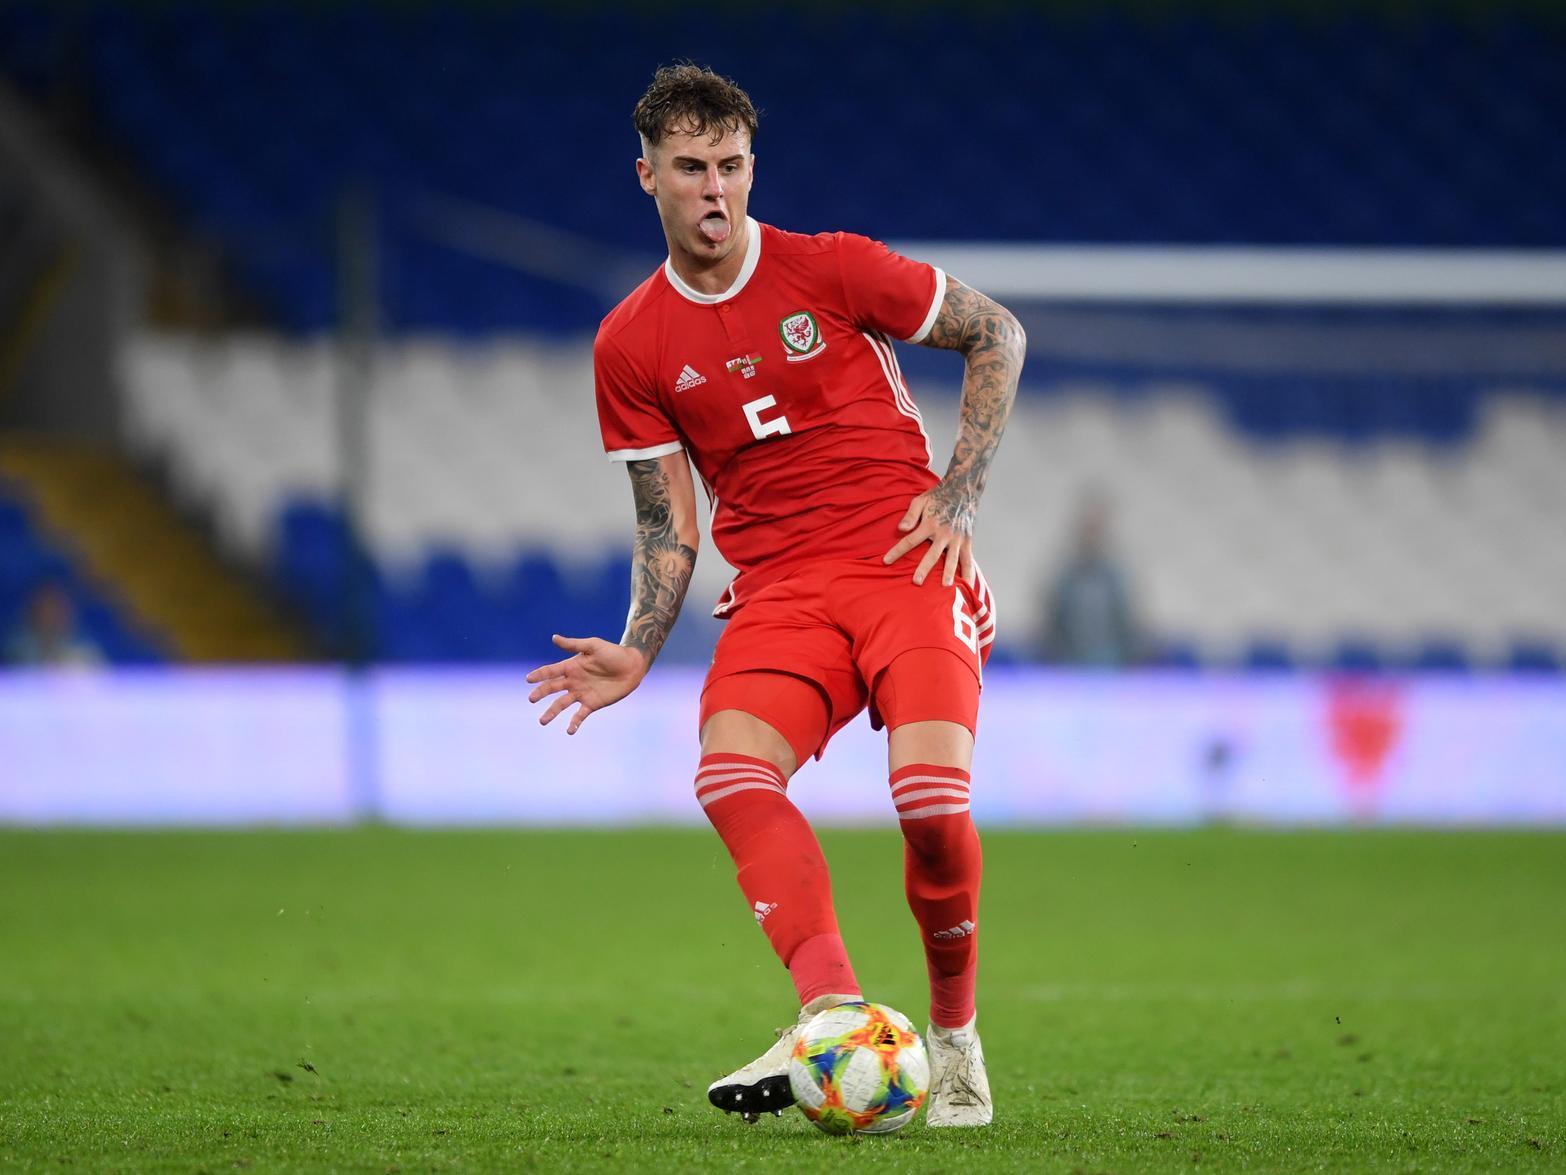 Manchester City have been tipped to battle it out with the likes of Chelsea and Arsenal to sign Swansea City defender Joe Rodon next summer, as they look to freshen up their struggling back line. (Daily Mail)